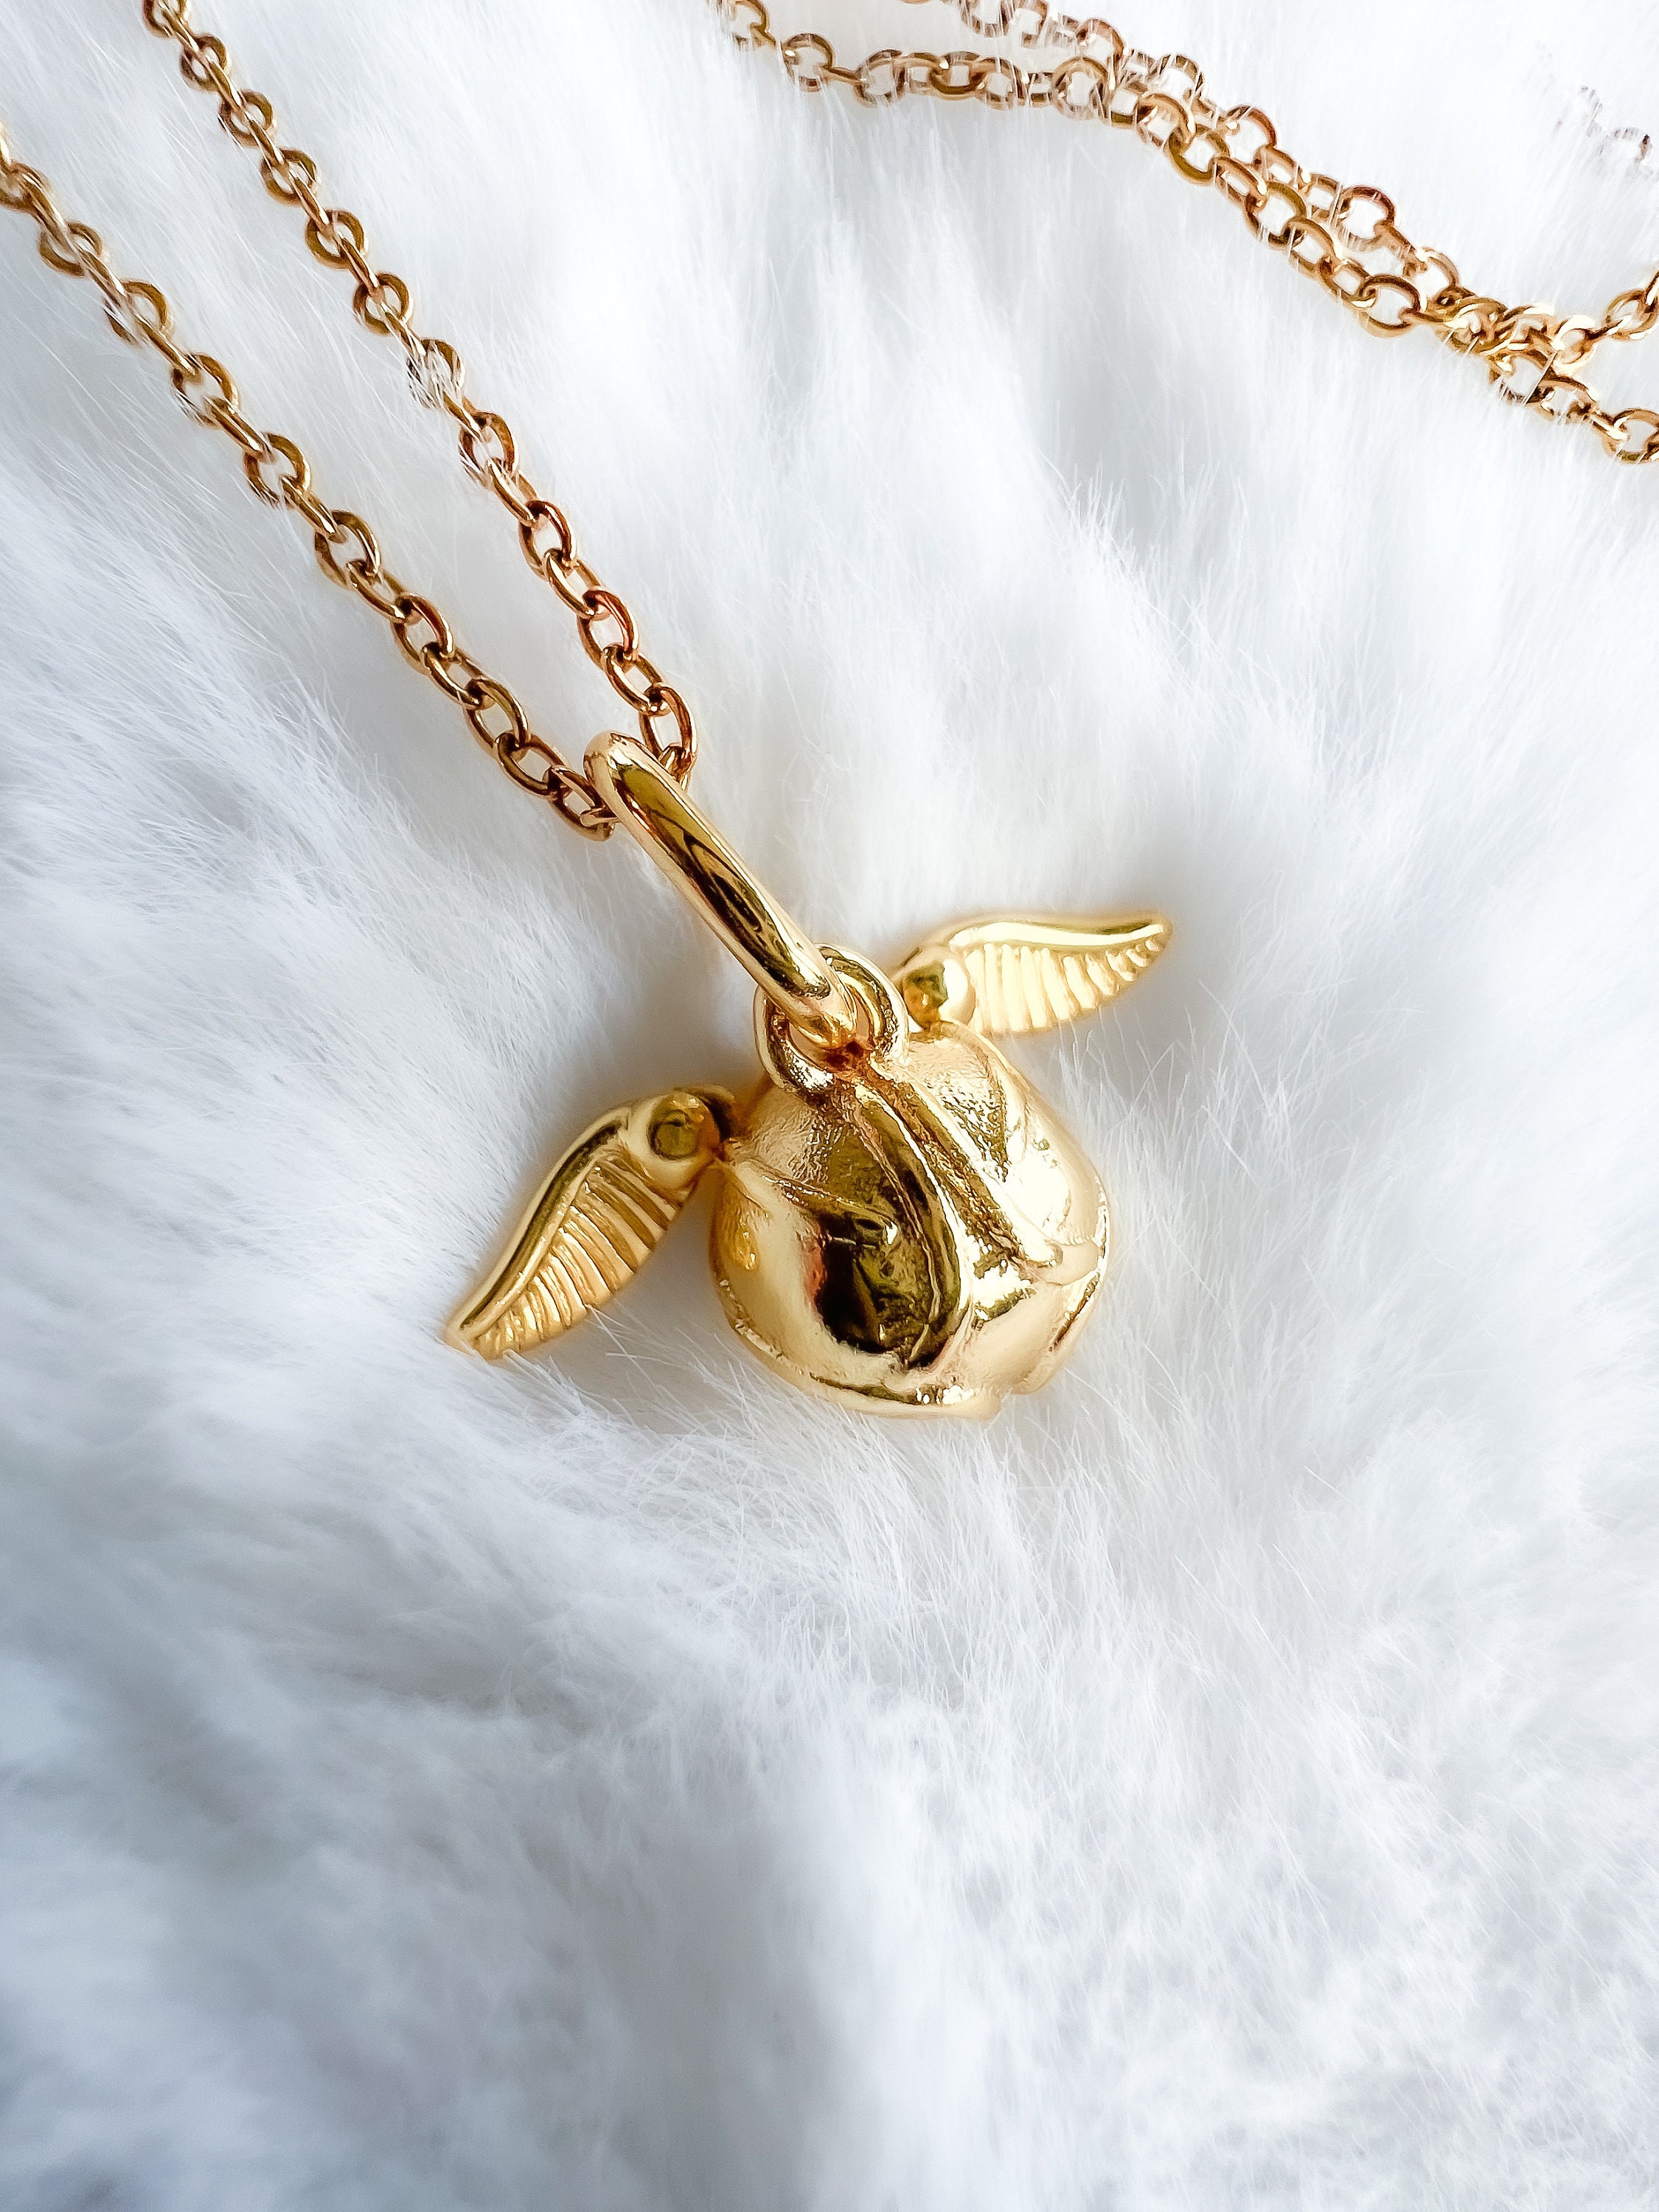 Quidditch The Deathly Hallows Wings Golden Snitch Harry Potter Necklace Hot  Gift